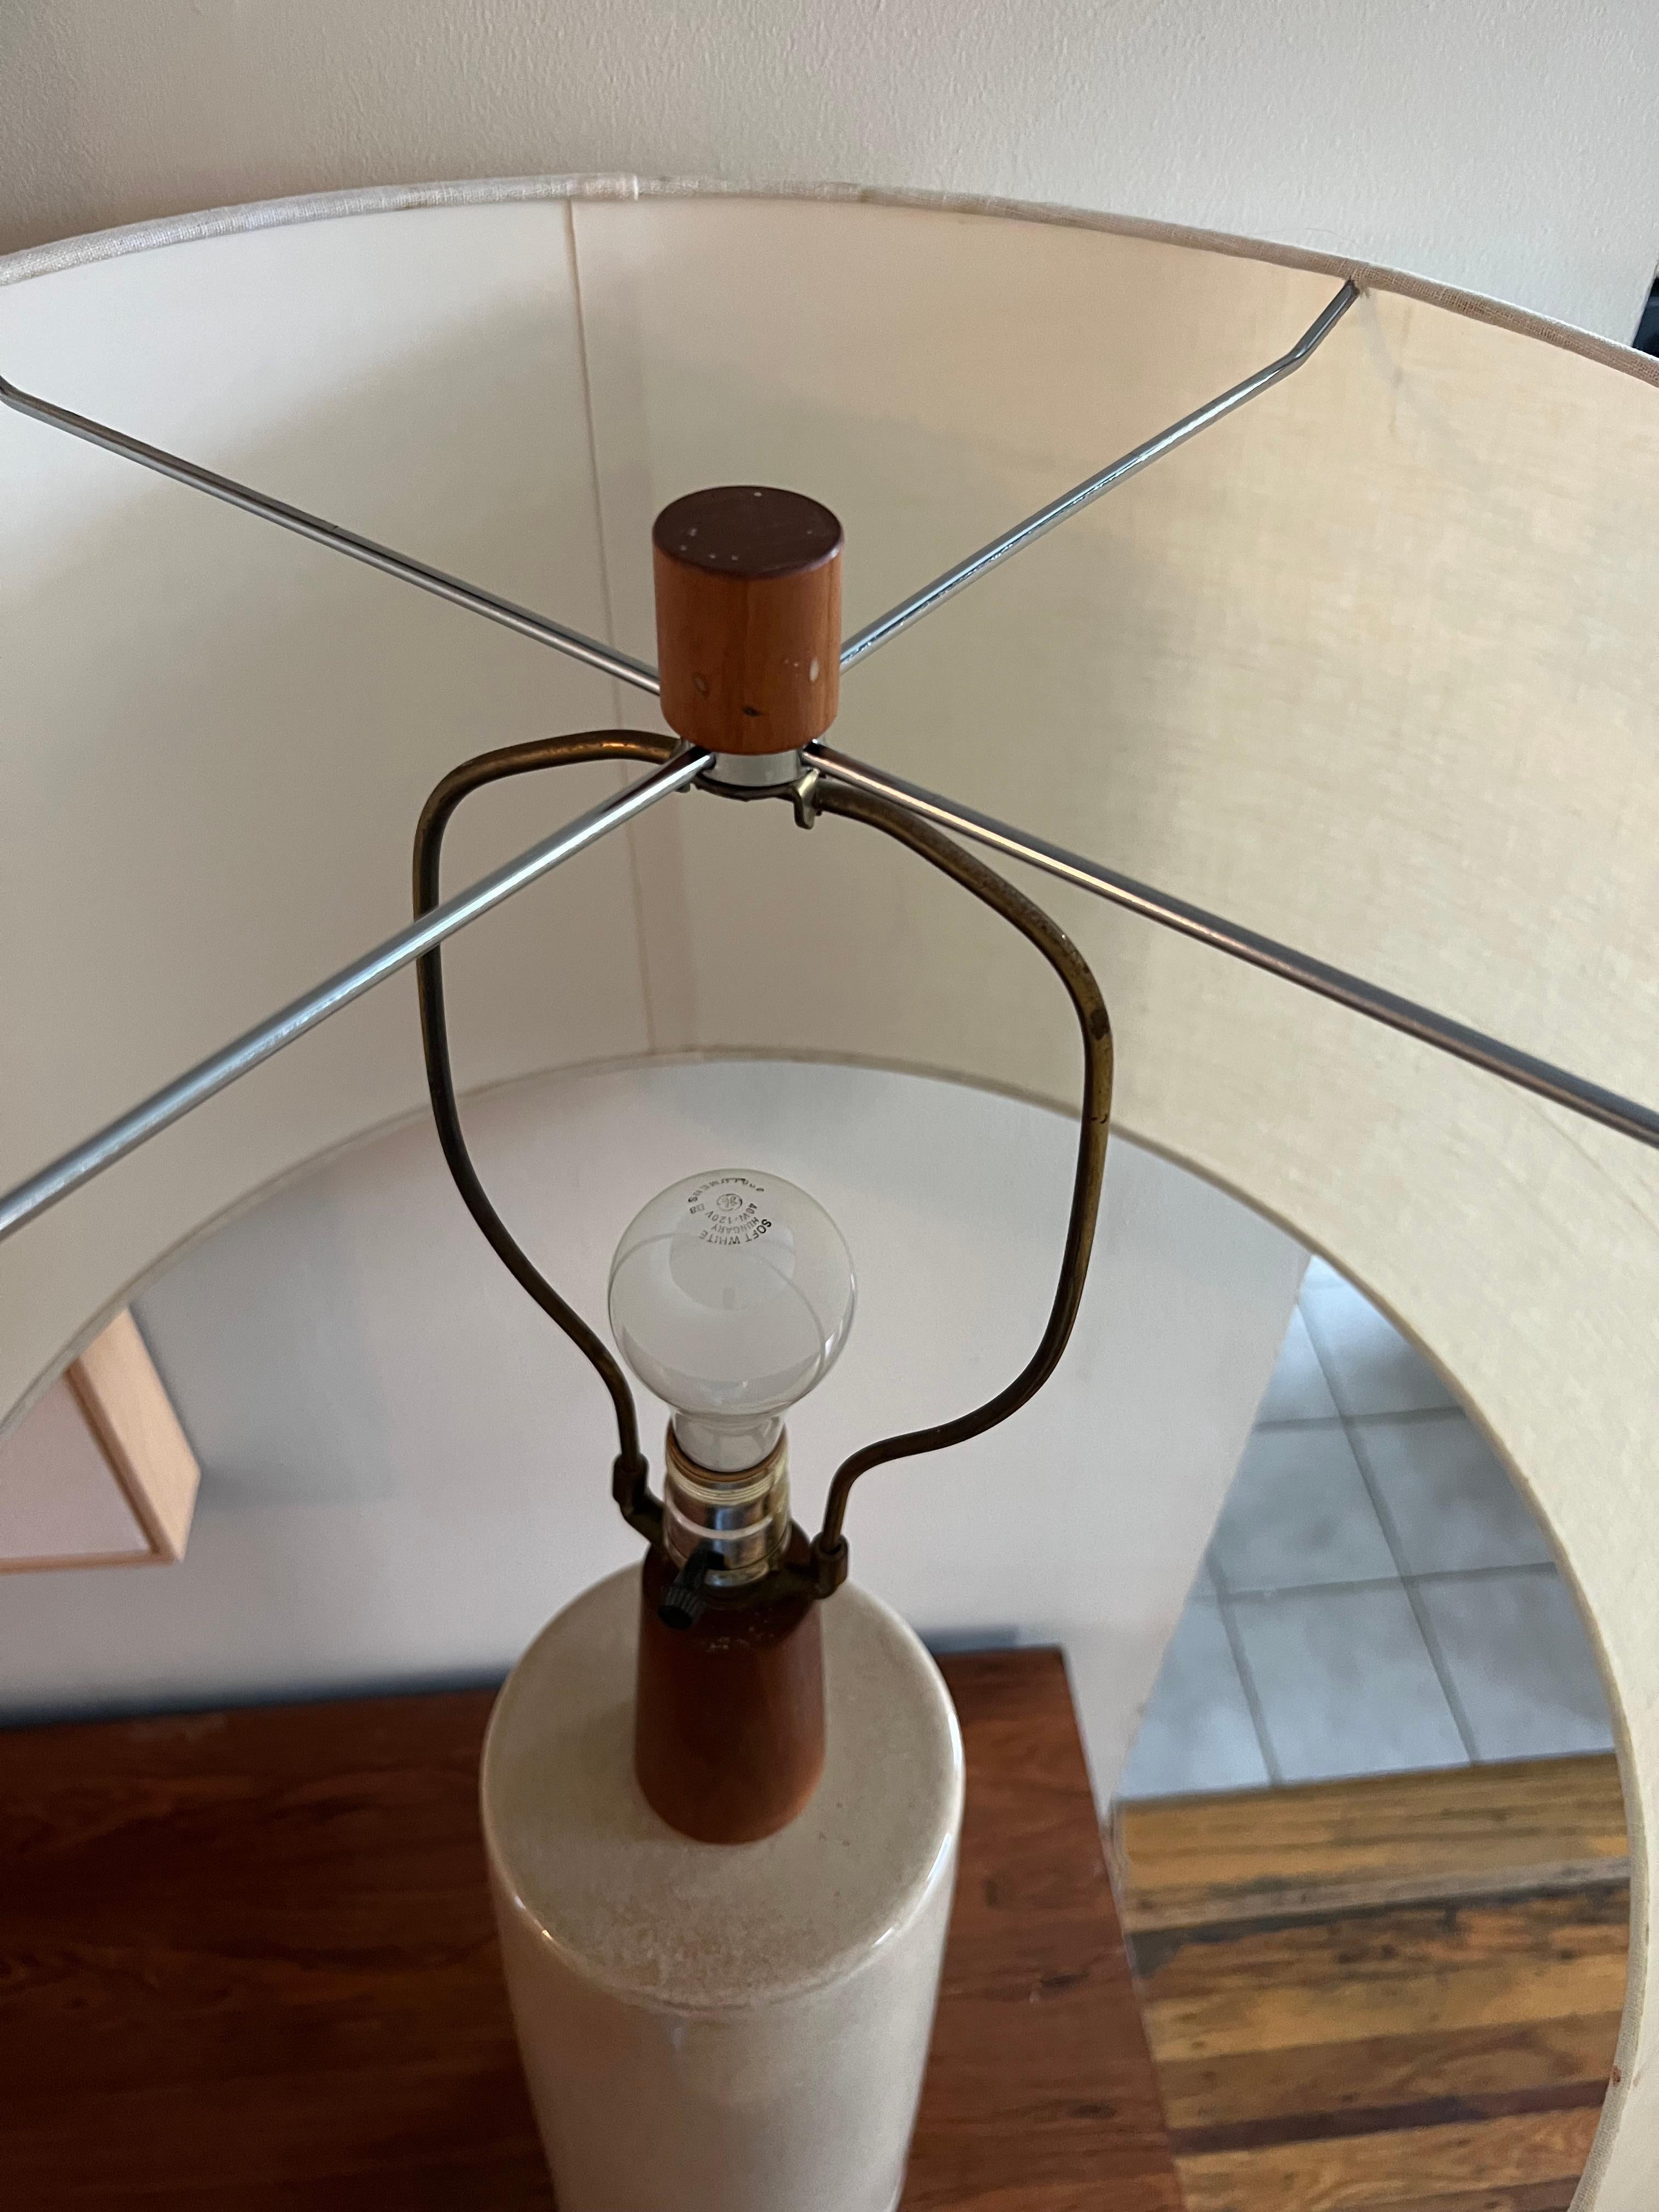 Classic from ceramic table lamp by husband and wife team, Gordon and Jane Martz. Walnut stem and finial. Signed at back. Natural linen shade is 20